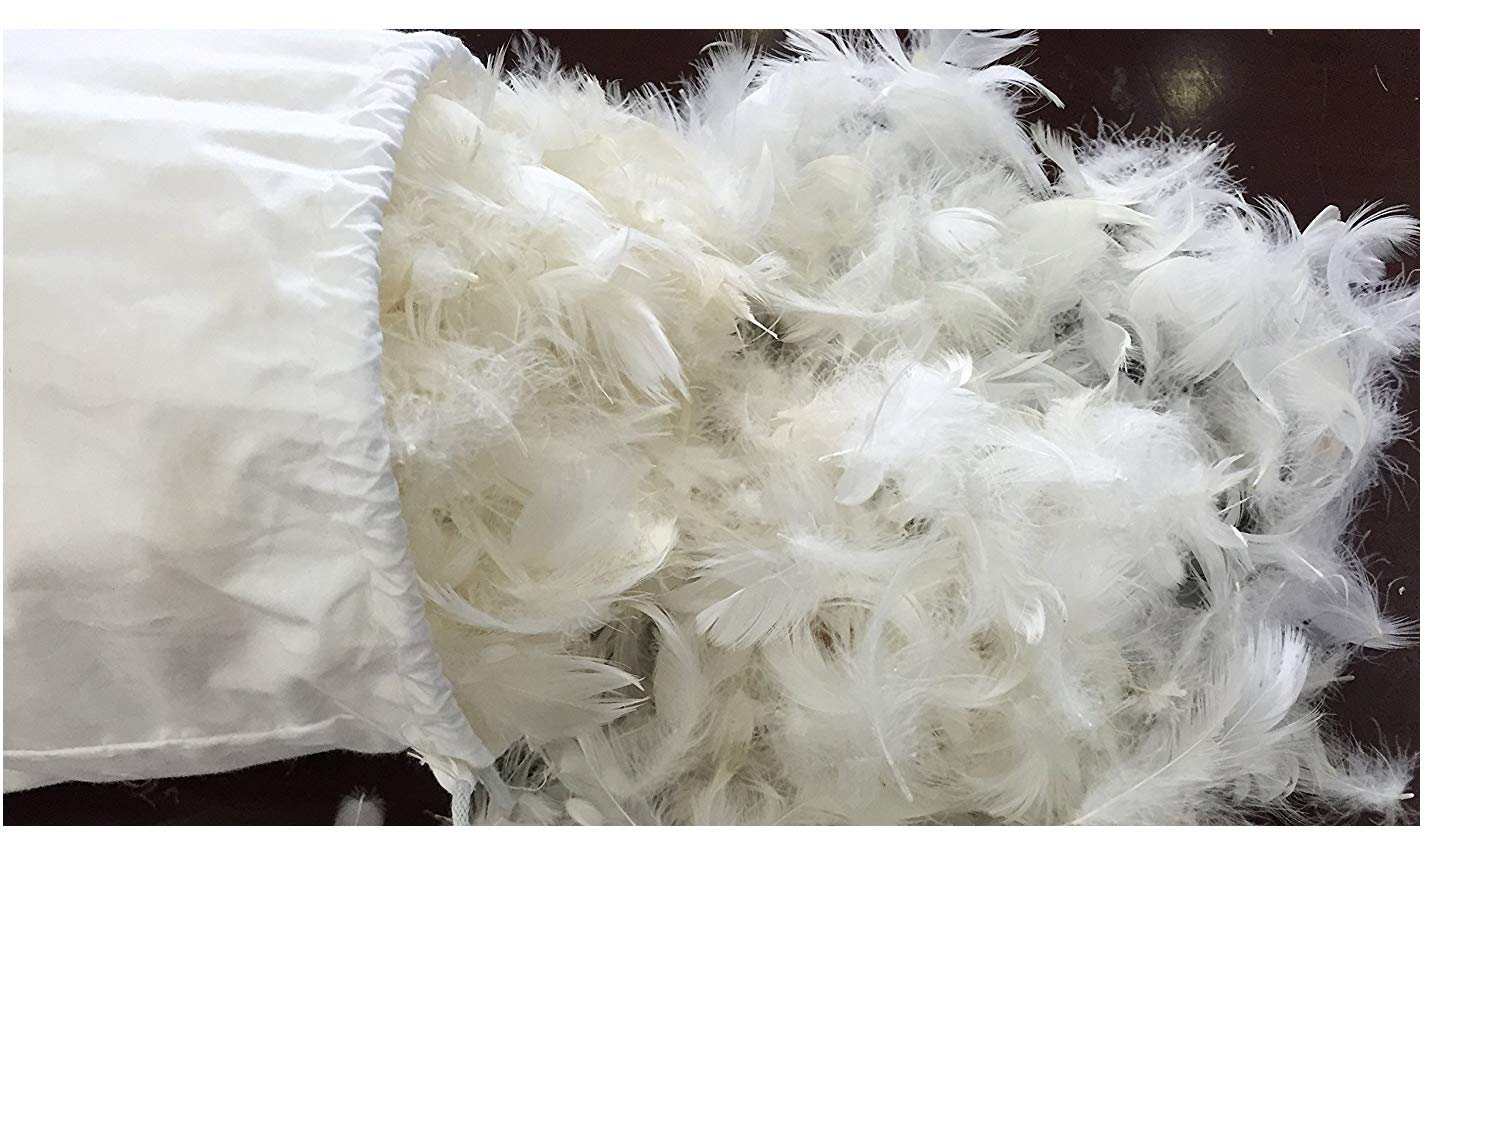 Wholesale Washed White Duck Down Bulk Feathers for Filling Duvet, Pillow -  China Goose Down and Goose Down Feathers price